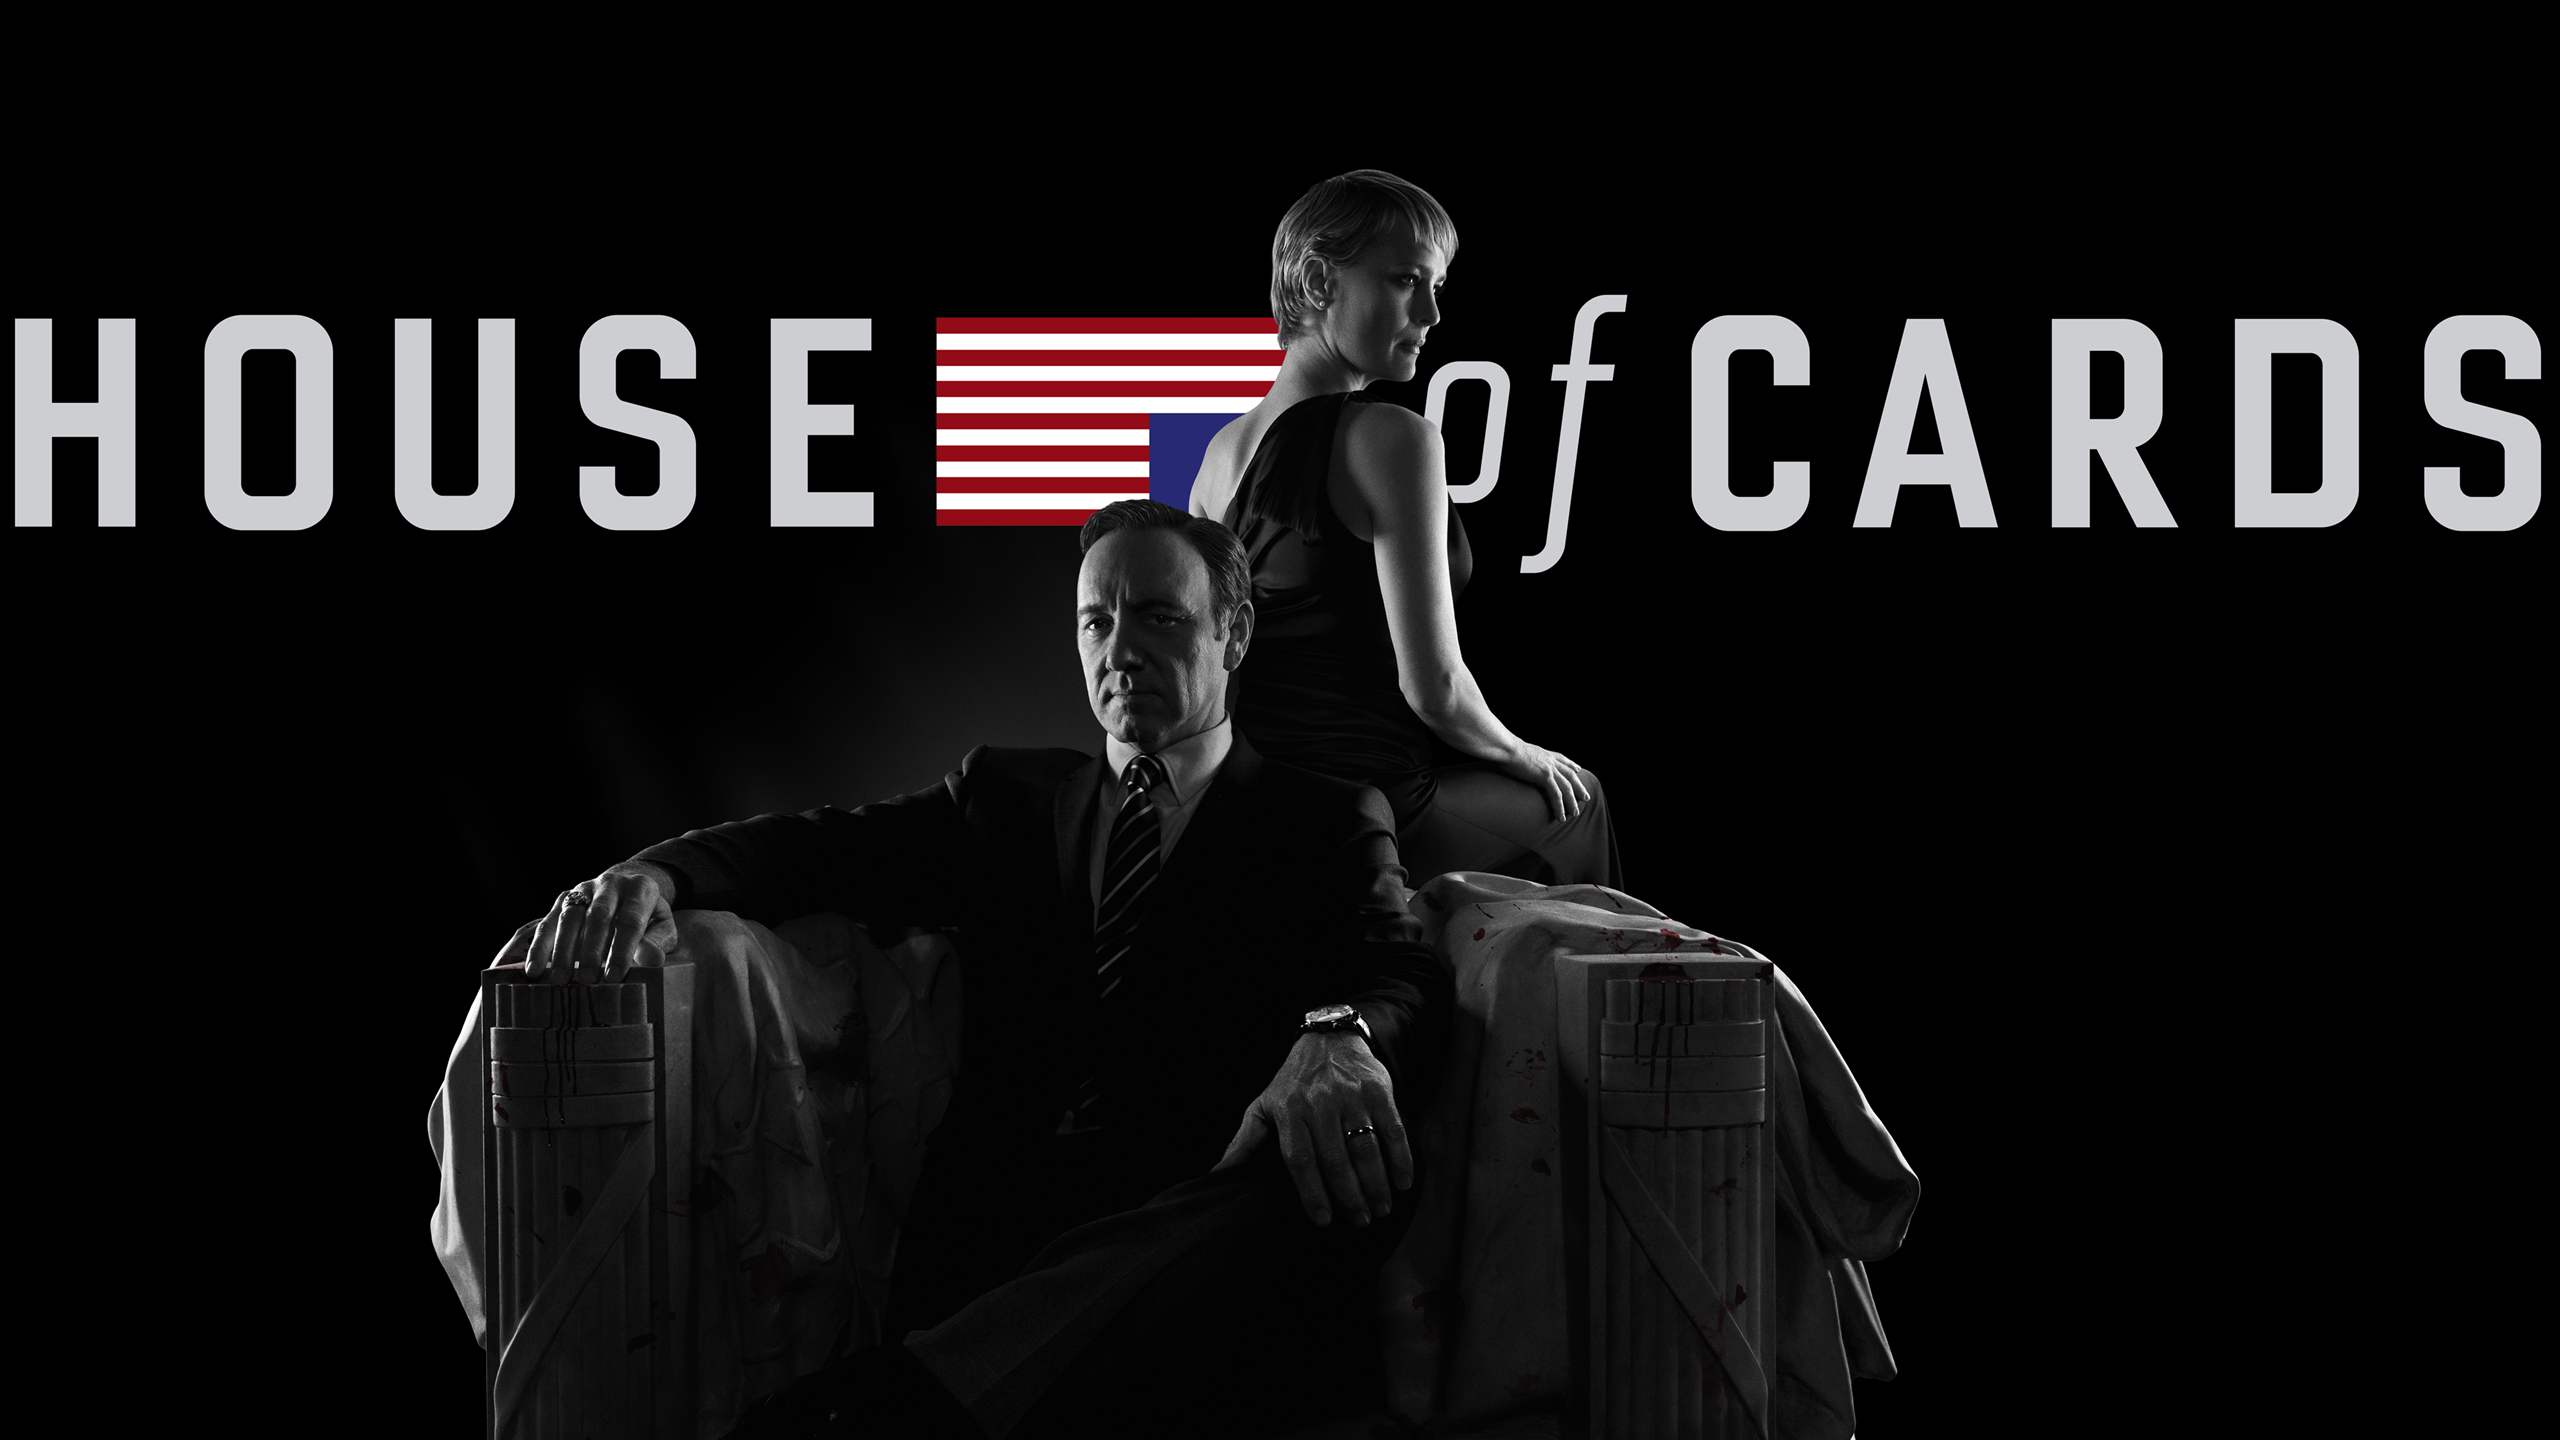 General 2560x1440 House of Cards Frank Underwood Kevin Spacey Robin Wright Claire Underwood American flag sitting couple black background TV series digital art simple background text low light